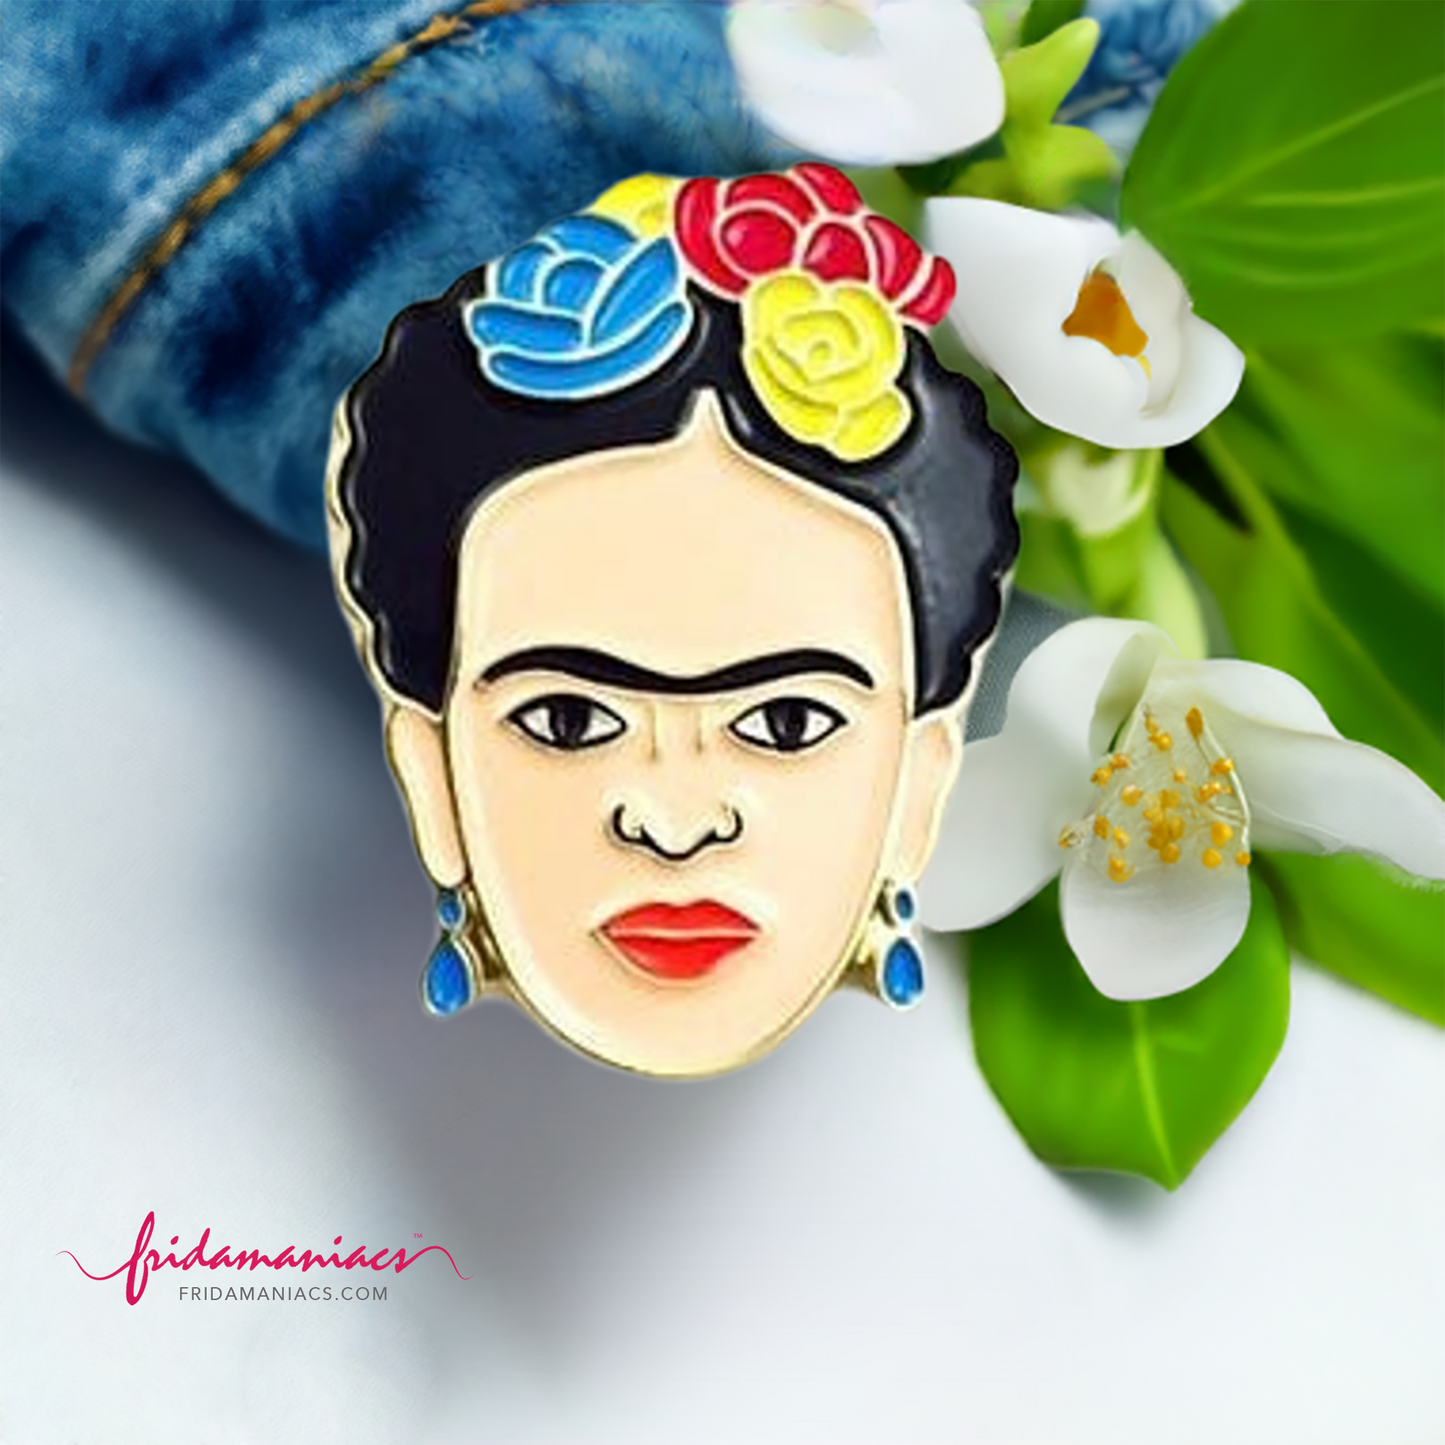 frida kahlo enamel pin with flowers. The best frida kahlo jewelry accessories for girls only at fridamaniacs.com